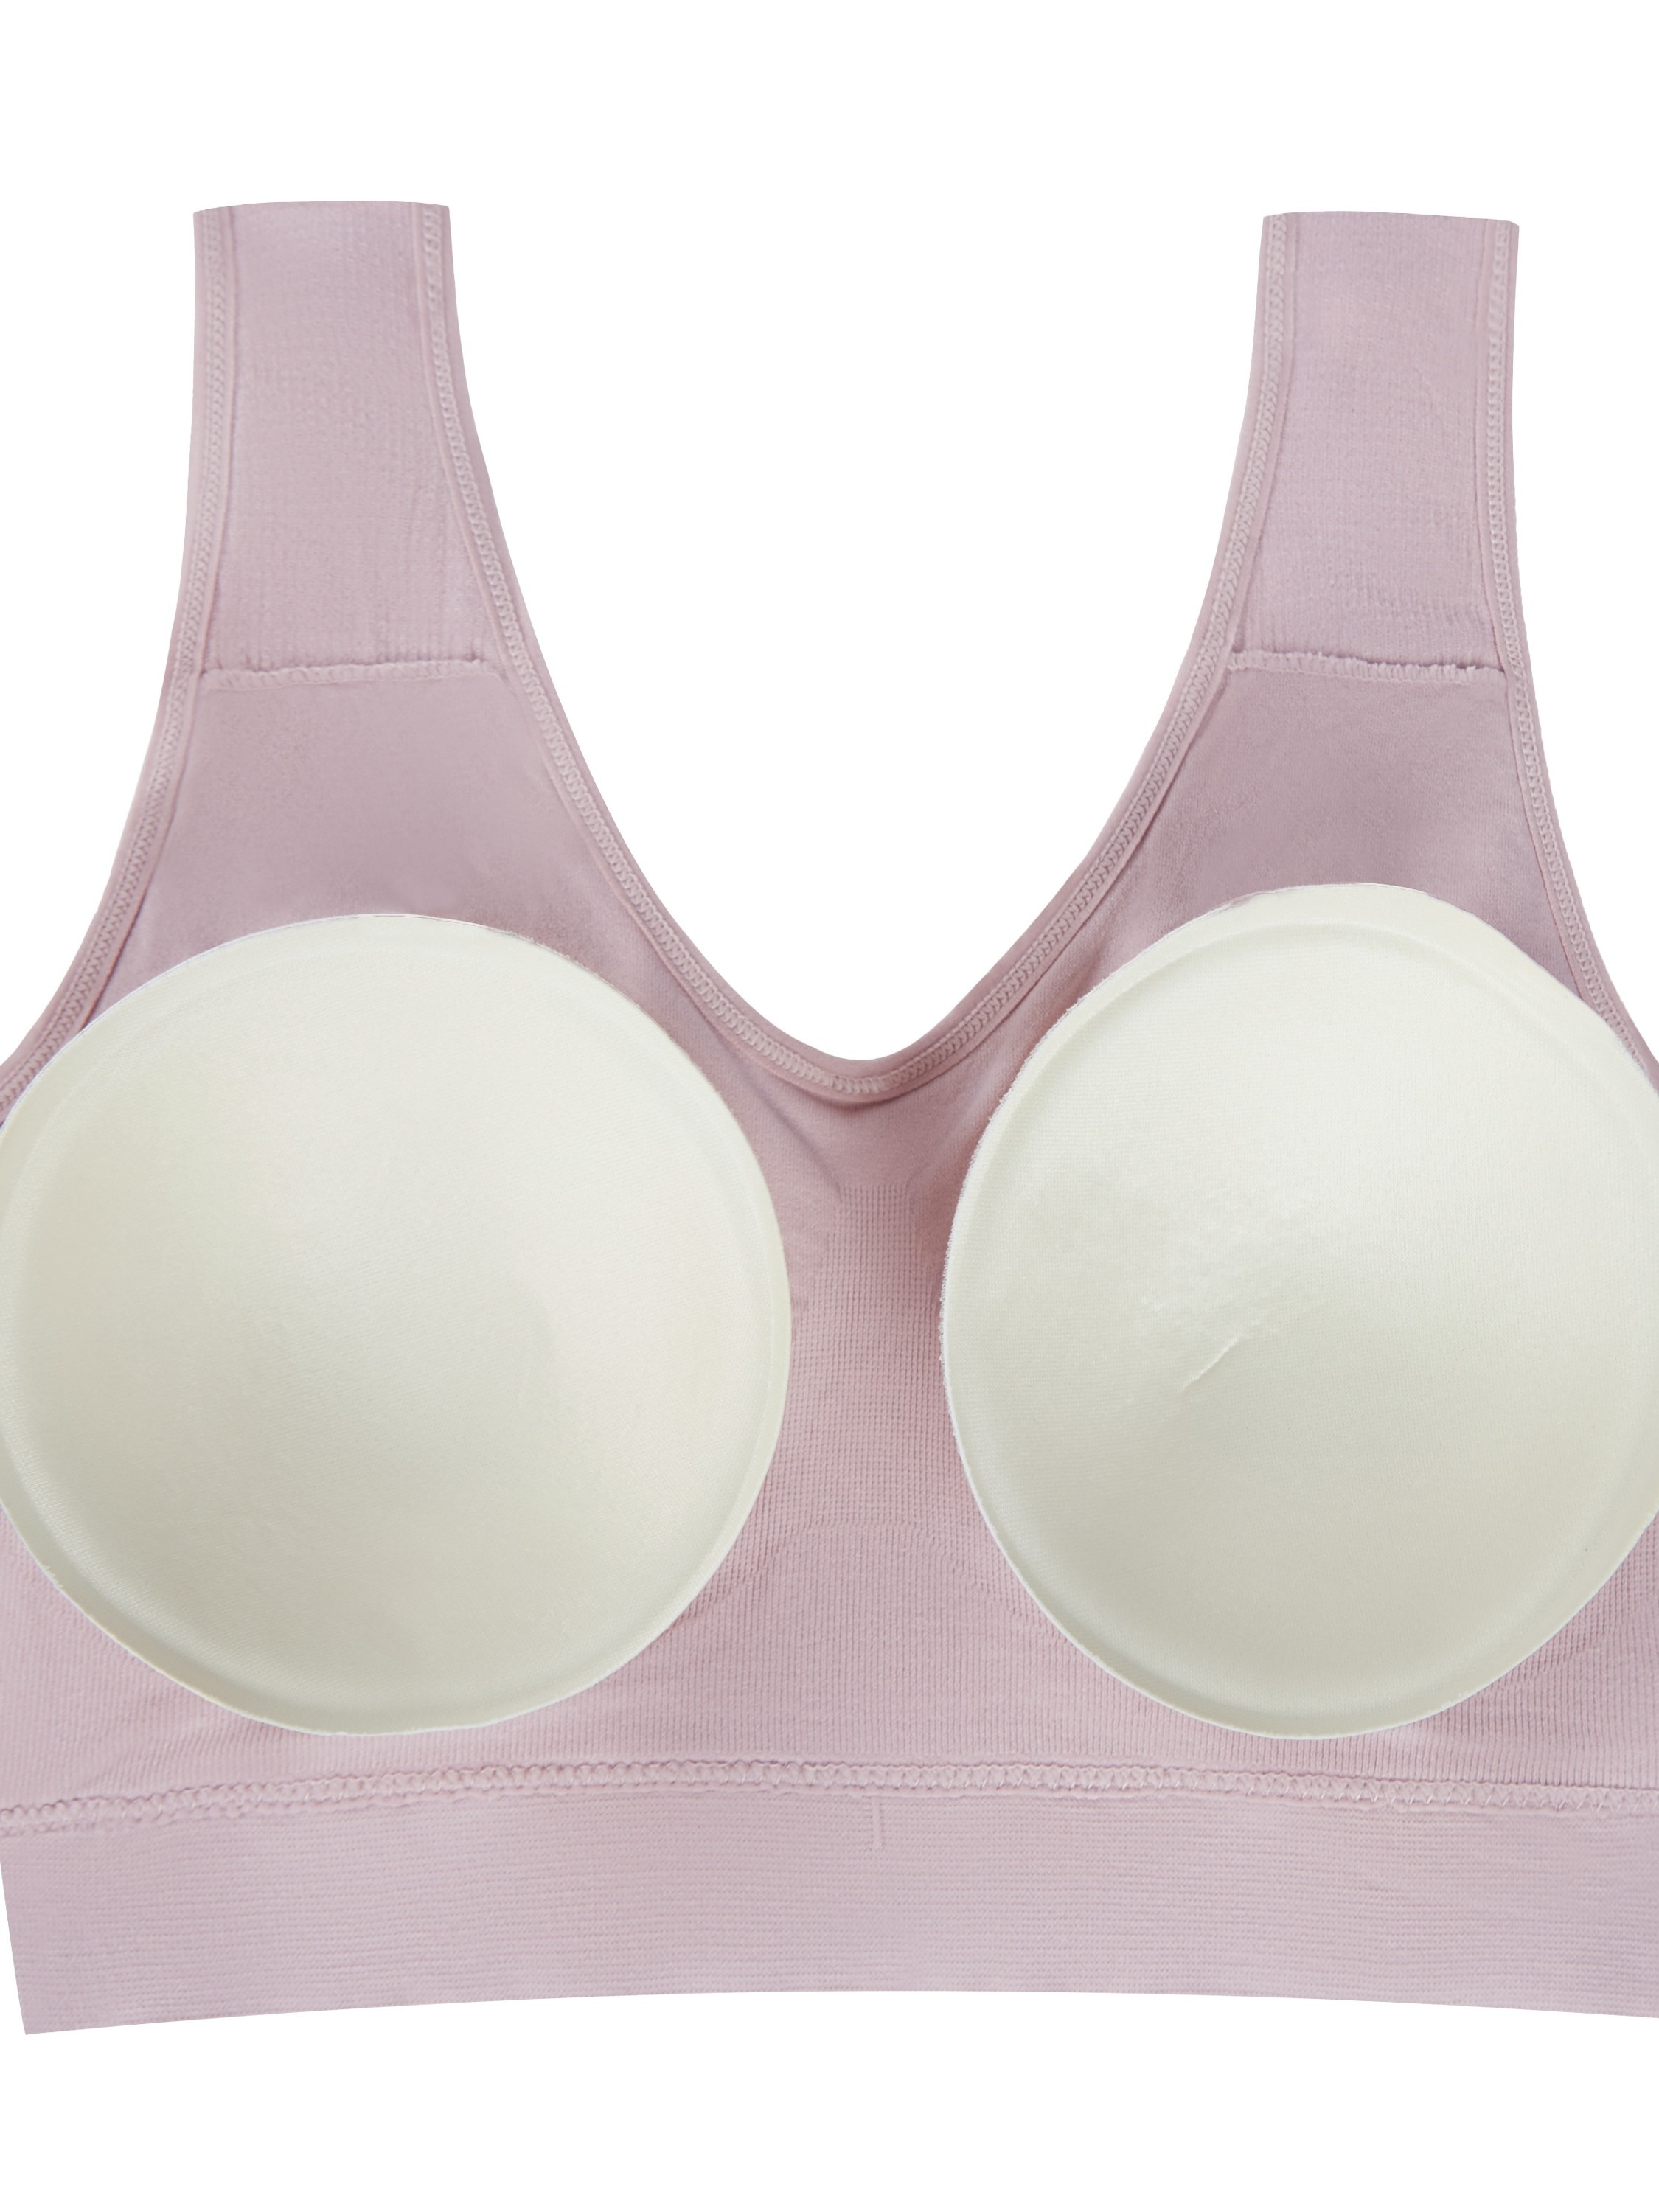 MRULIC sports bras for women Women's Seamless MID Solid Color Sports Bra  With Removable Bra Pad Rose Gold + 4XL 